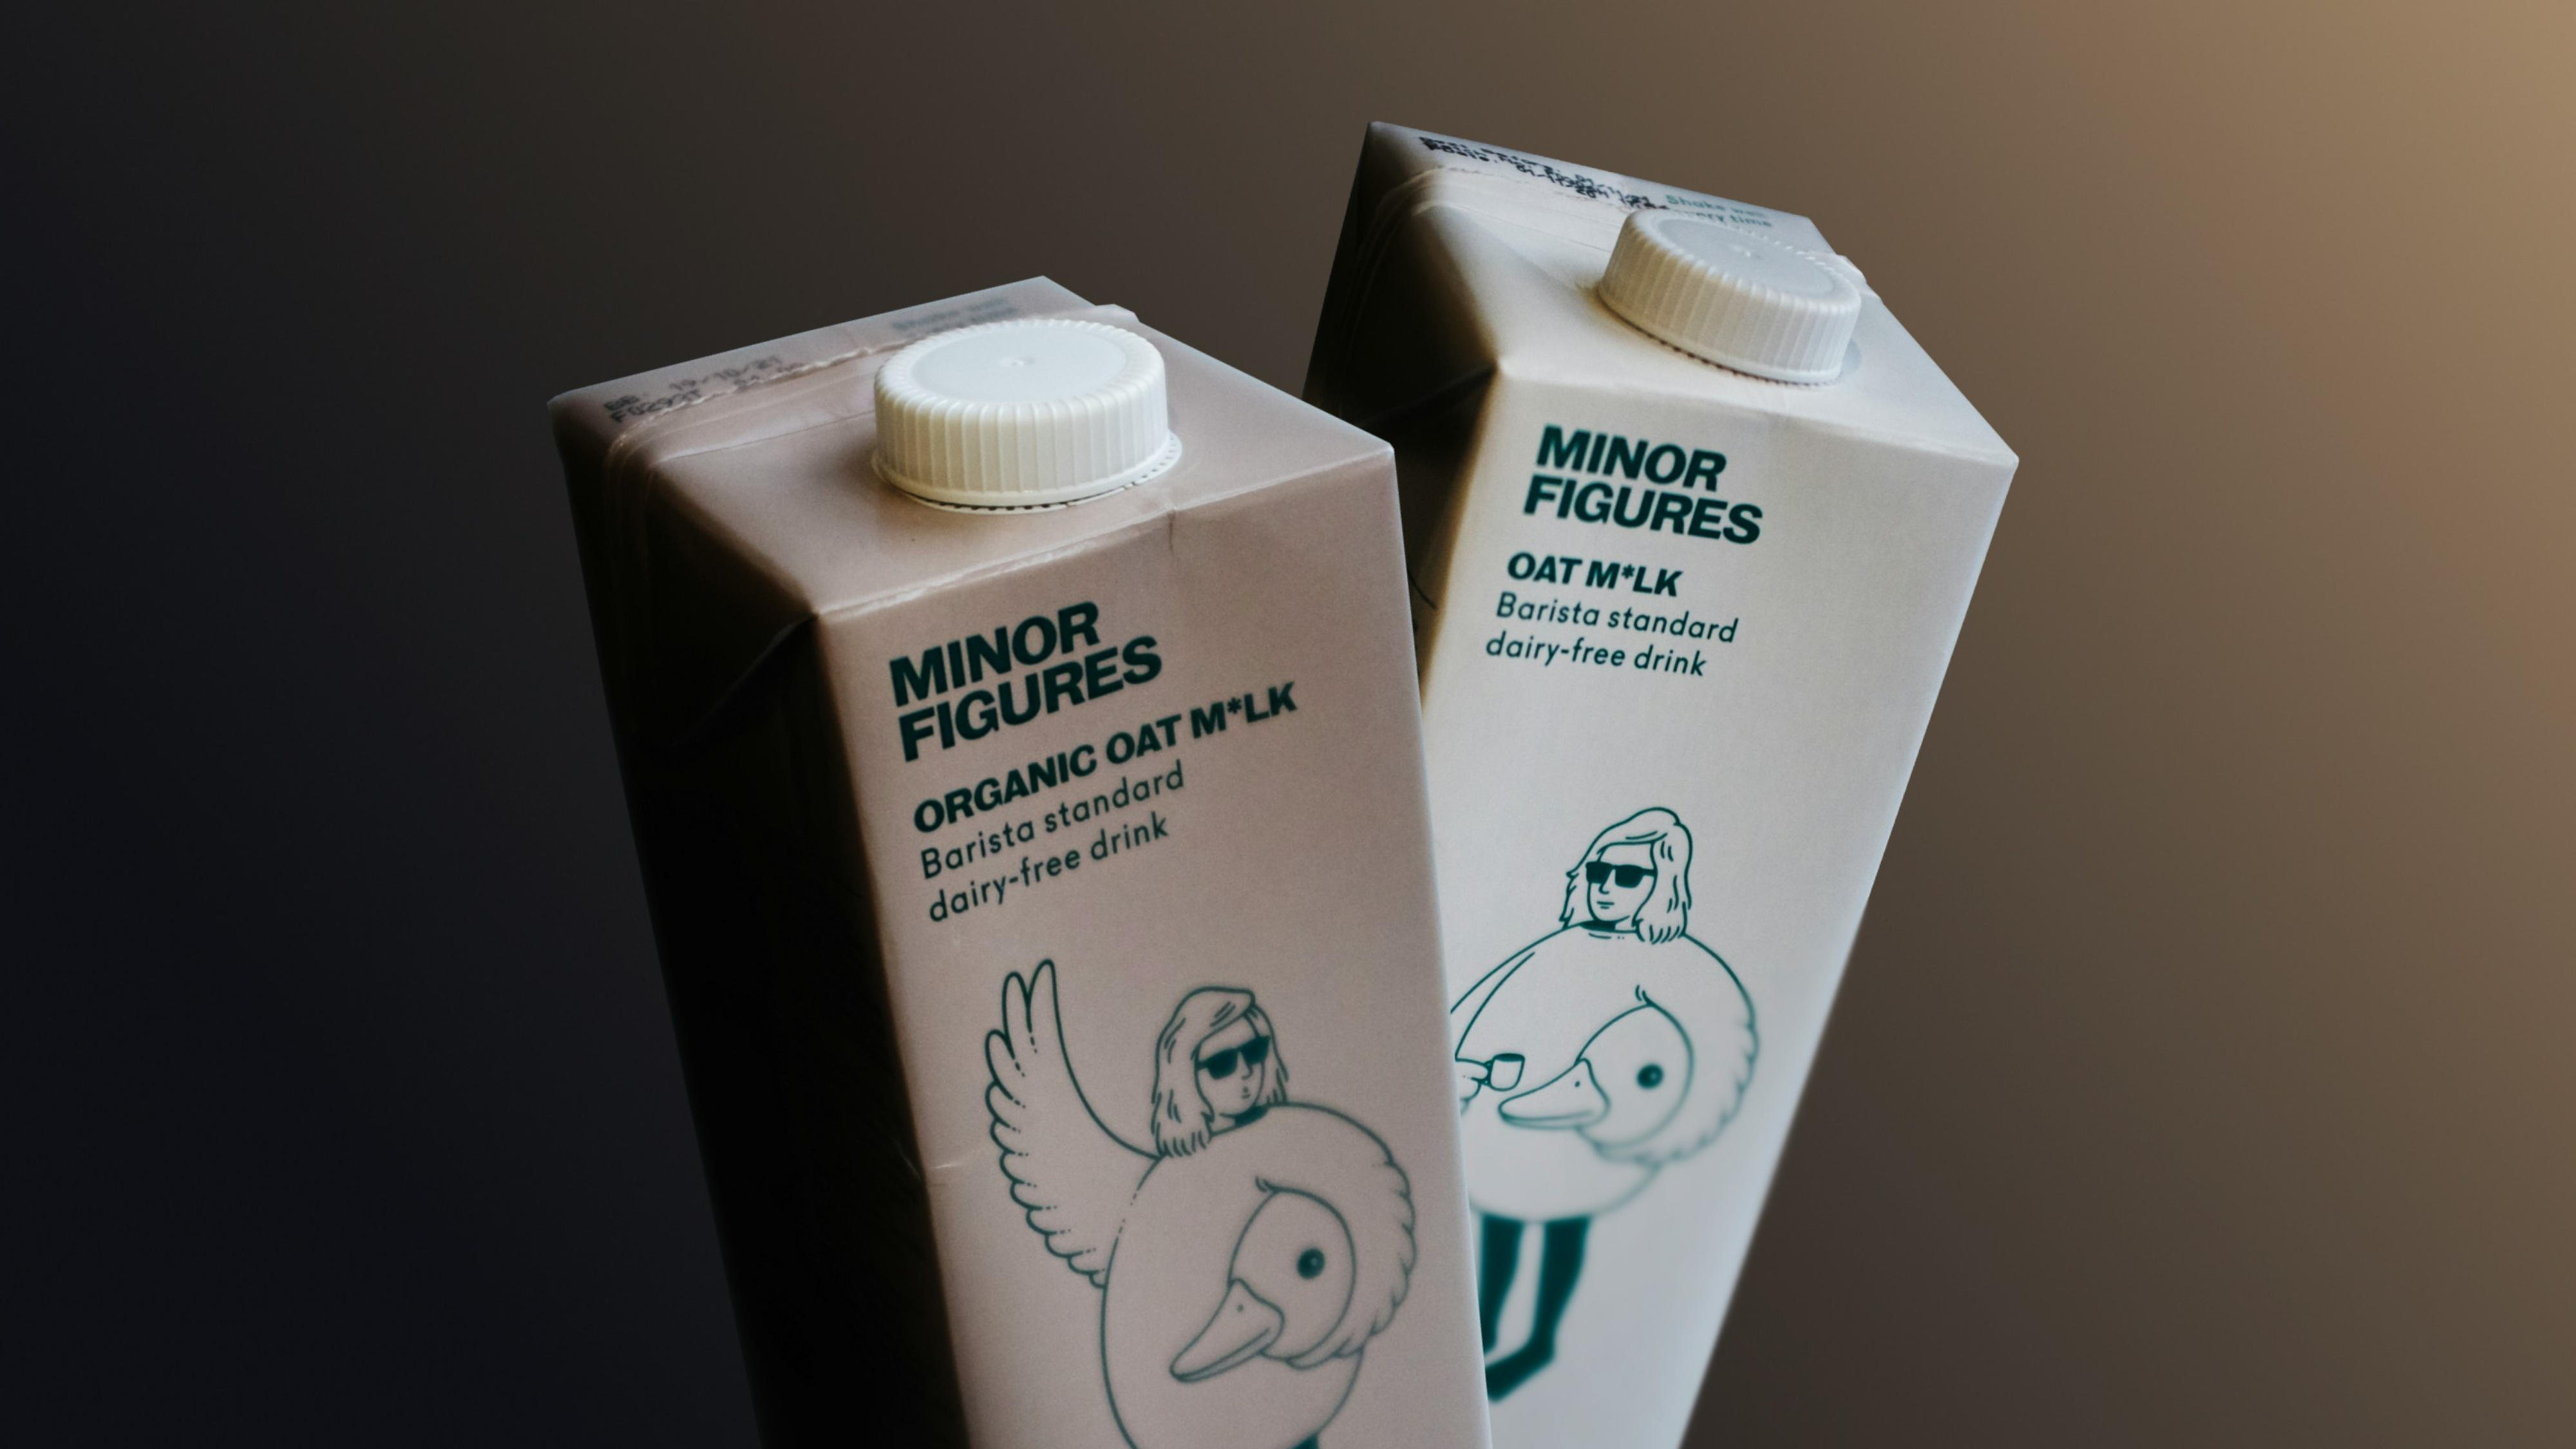 Two Minor Figures oat milk bottles next to each other.